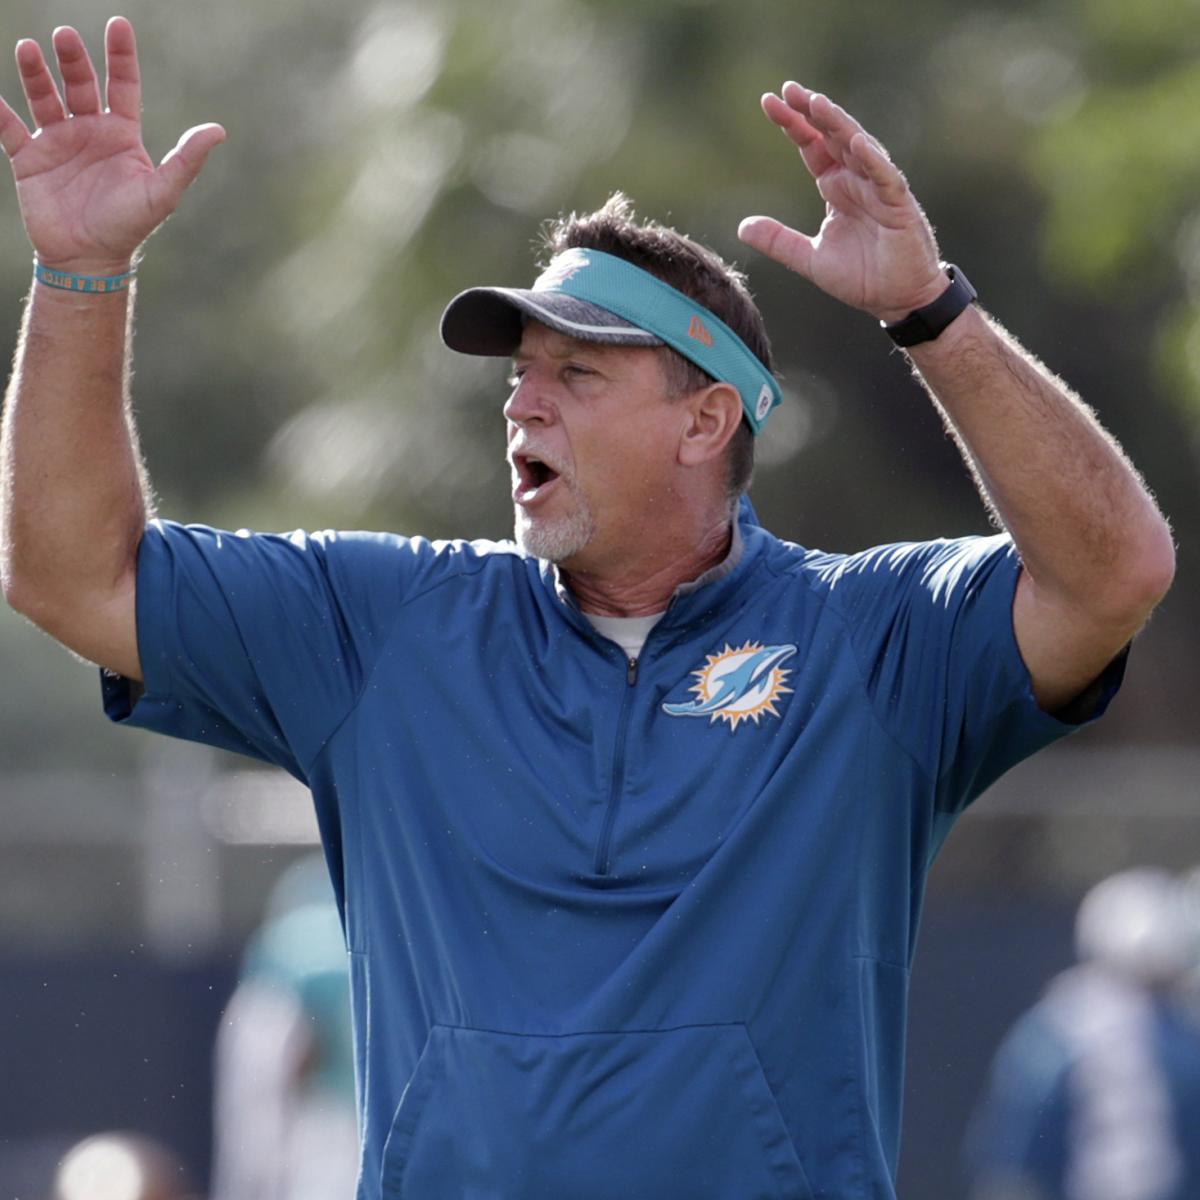 Chris Foerster Resigns From Dolphins After Video Shows Him Snorting White Powder News Scores